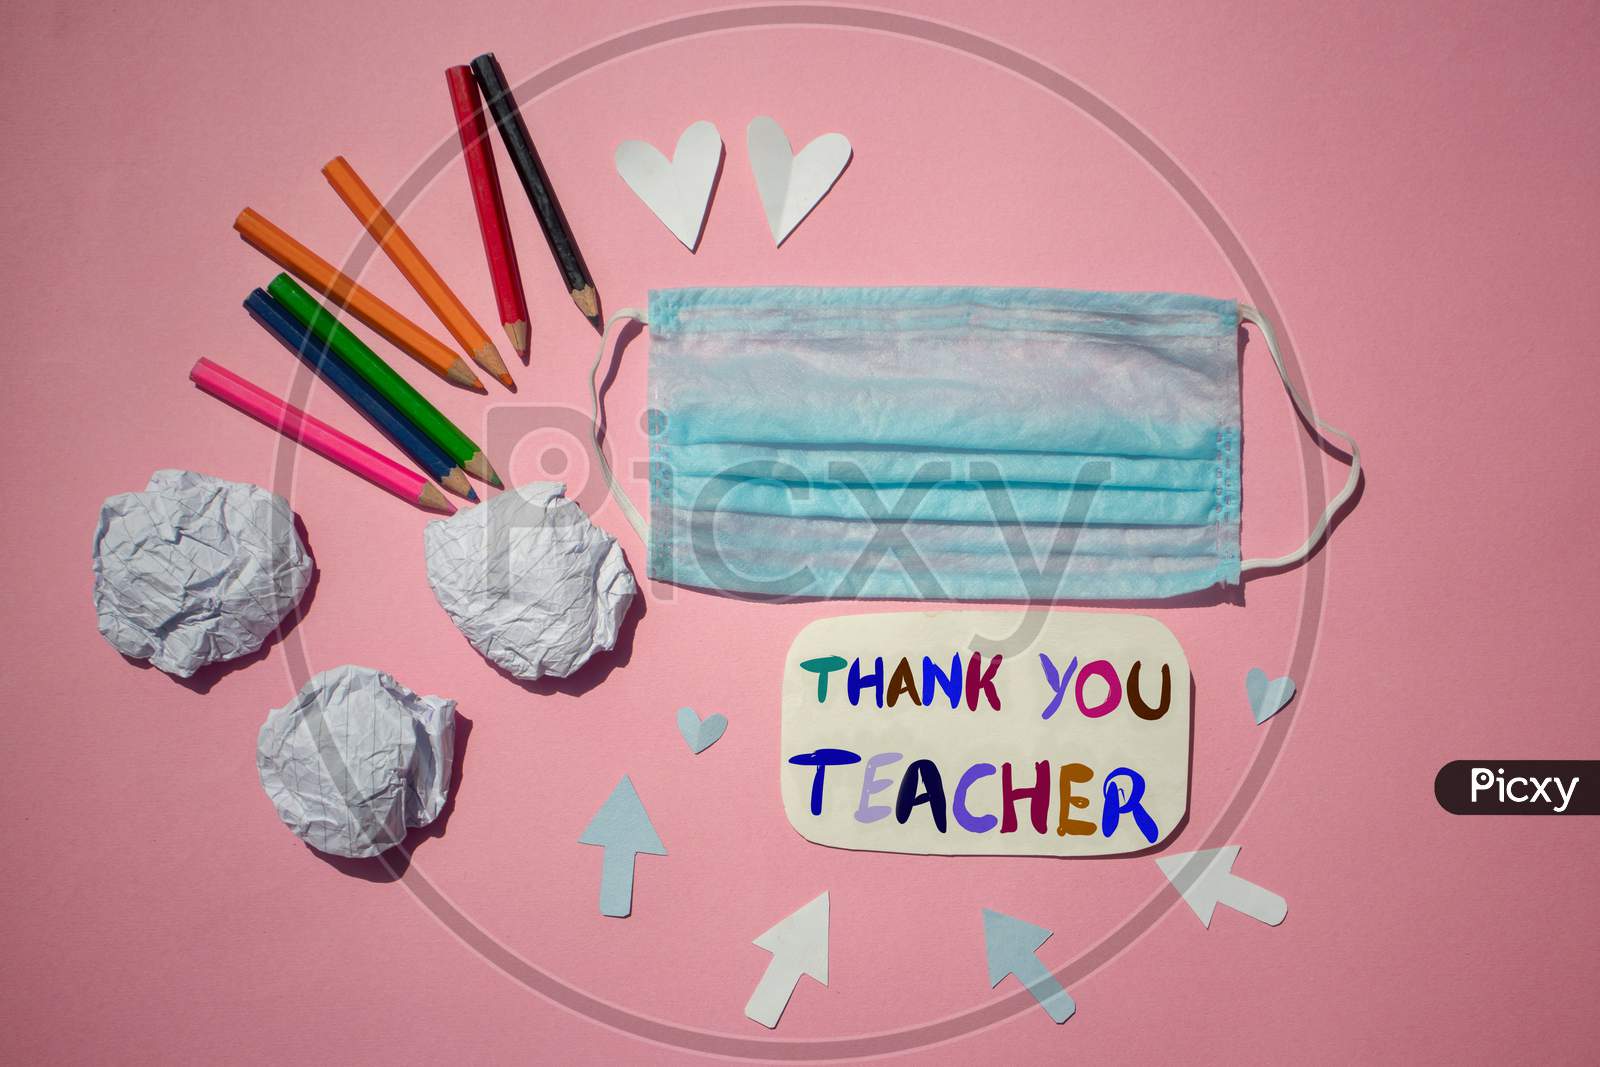 Thank You Teacher Written On Paper Note With Medical Face Mask And Color Pencils, Happy Teacher's Day Conceptual Photo